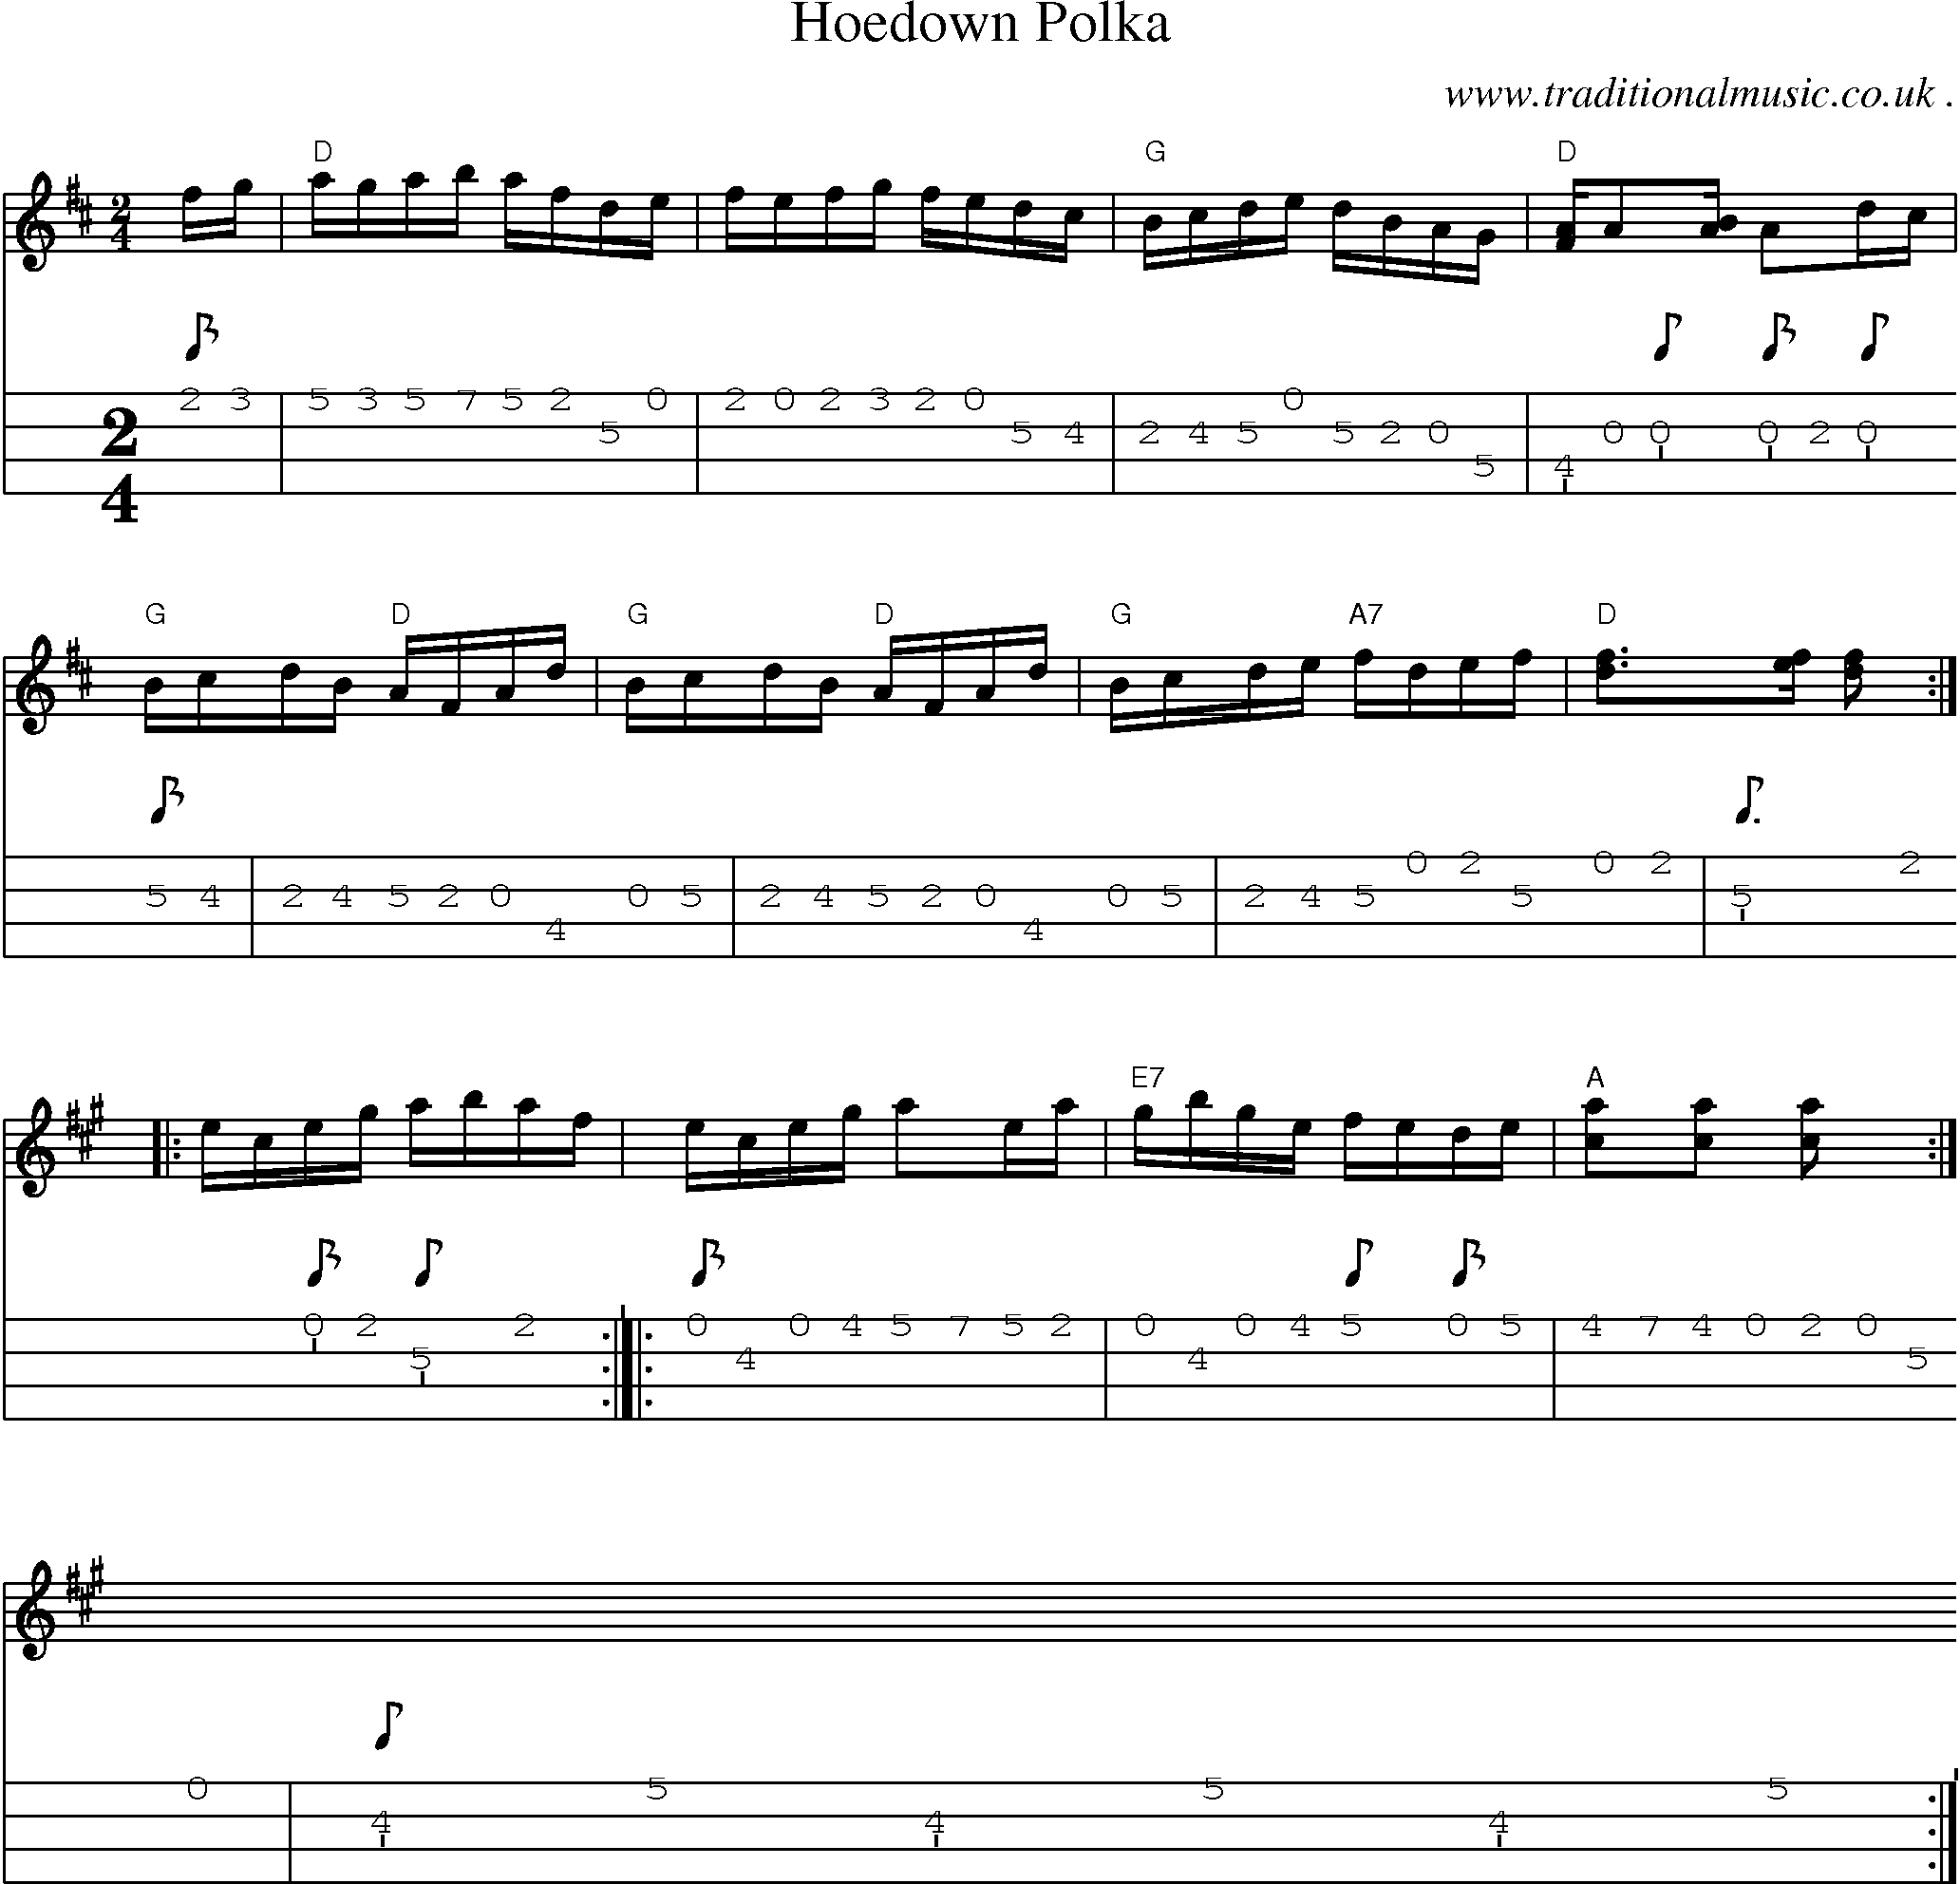 Music Score and Mandolin Tabs for Hoedown Polka